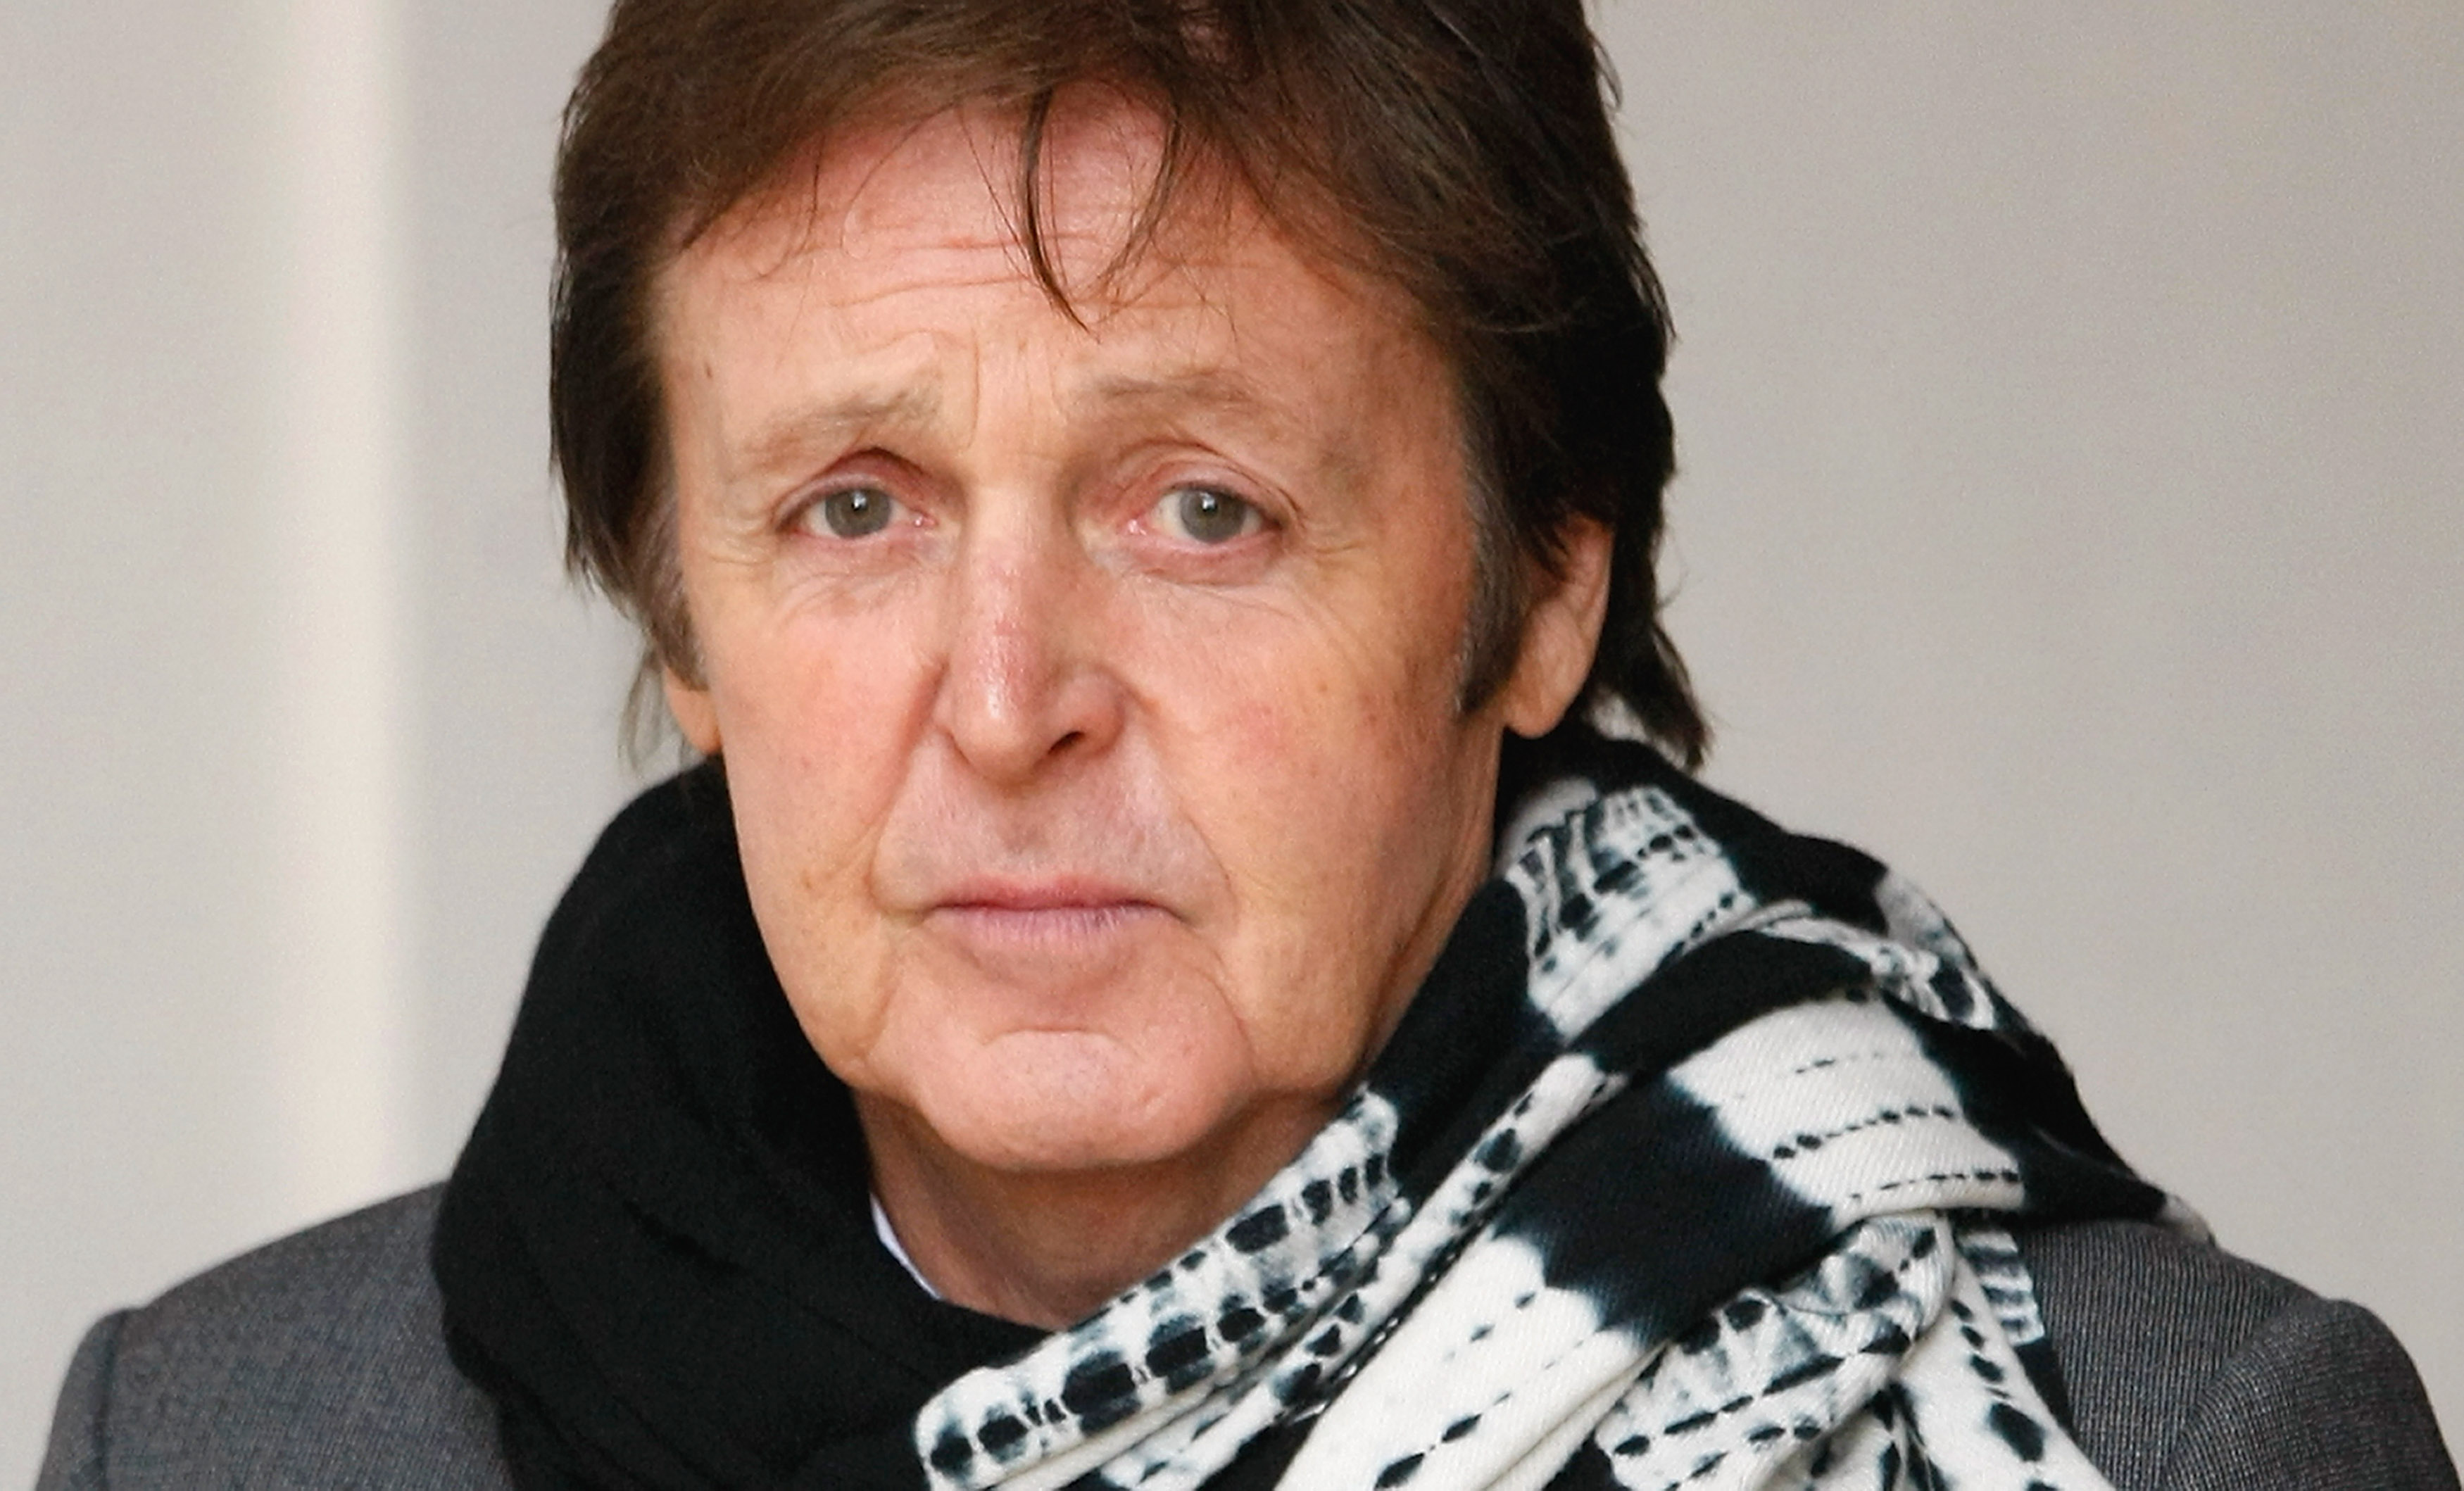 Paul McCartney during his divorce proceedings in 2008. | Source: Getty Images